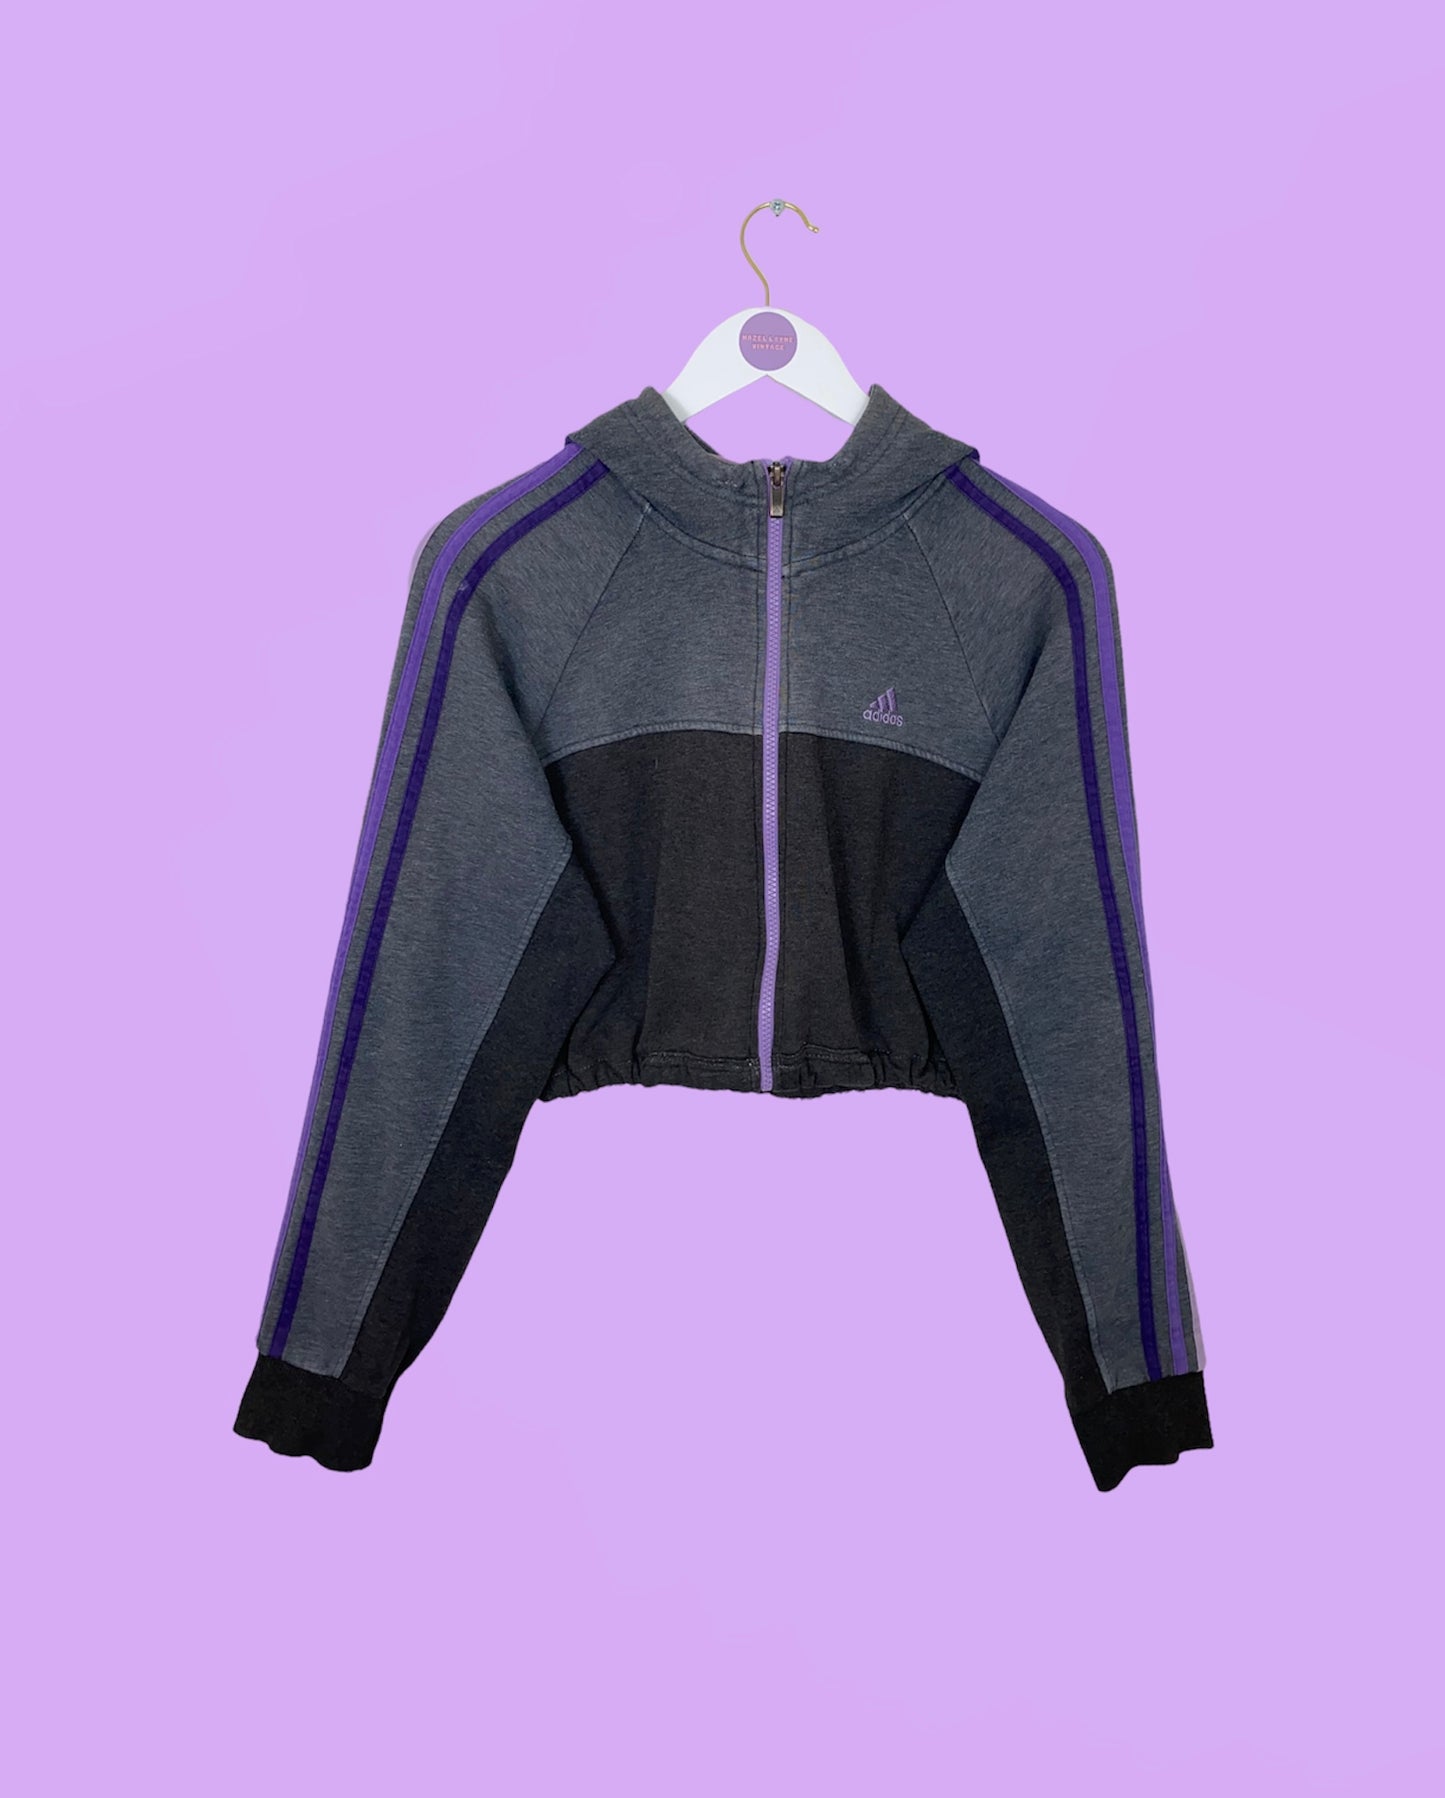 grey and purple 1/4 zip cropped hoodie with purple adidas logo shown on a white clothes hanger on a lilac background